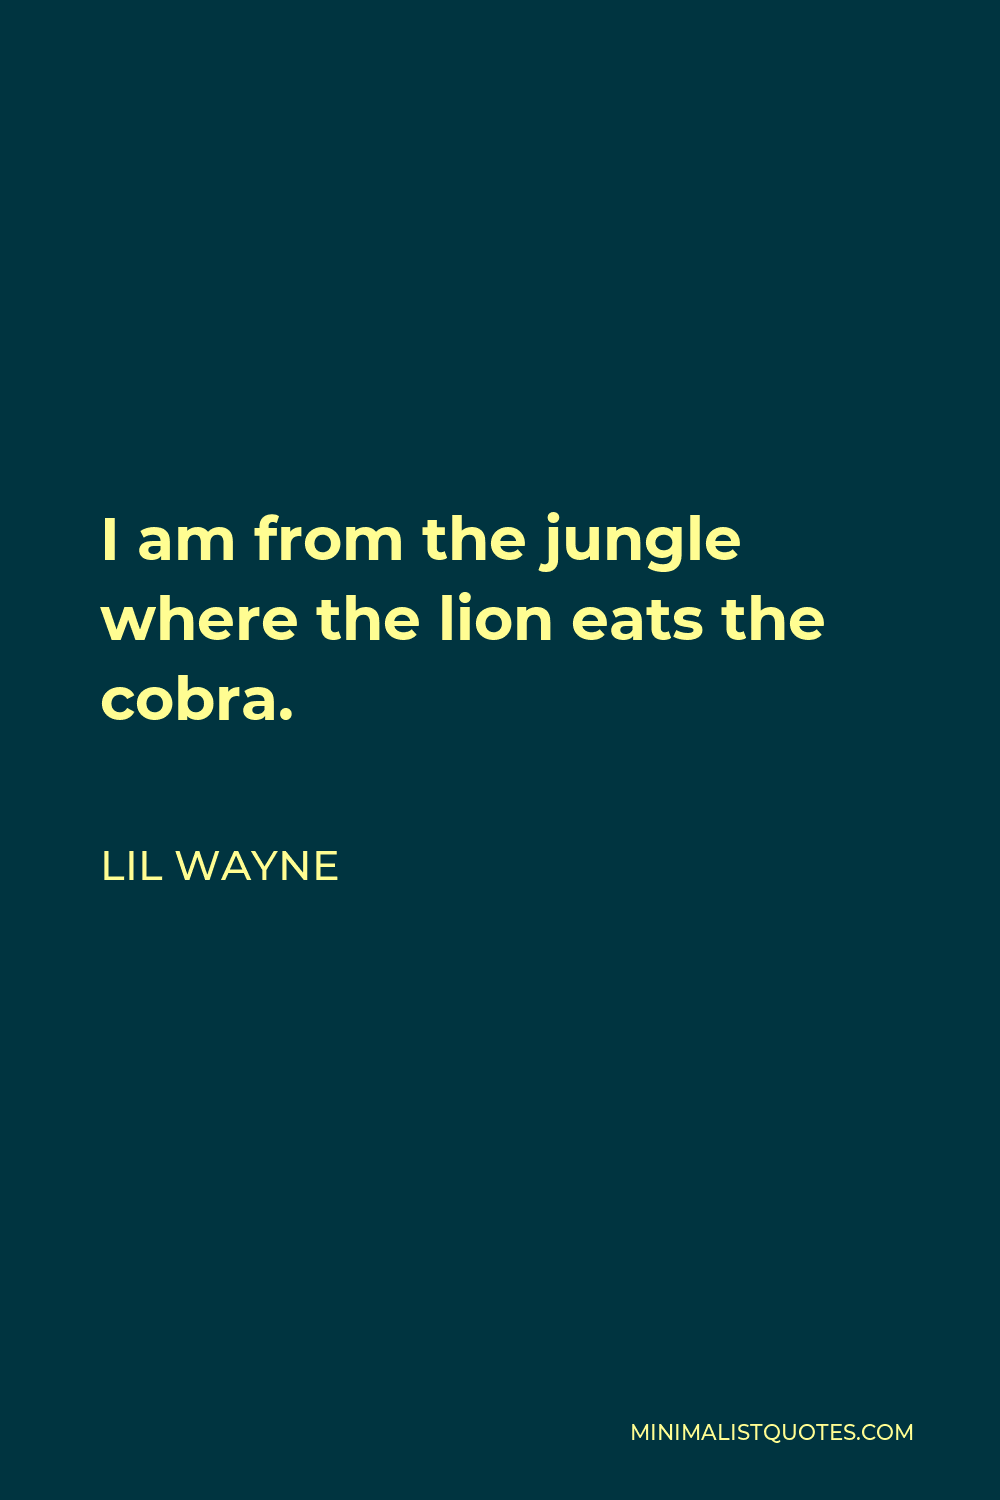 Lil Wayne Quote - I am from the jungle where the lion eats the cobra.